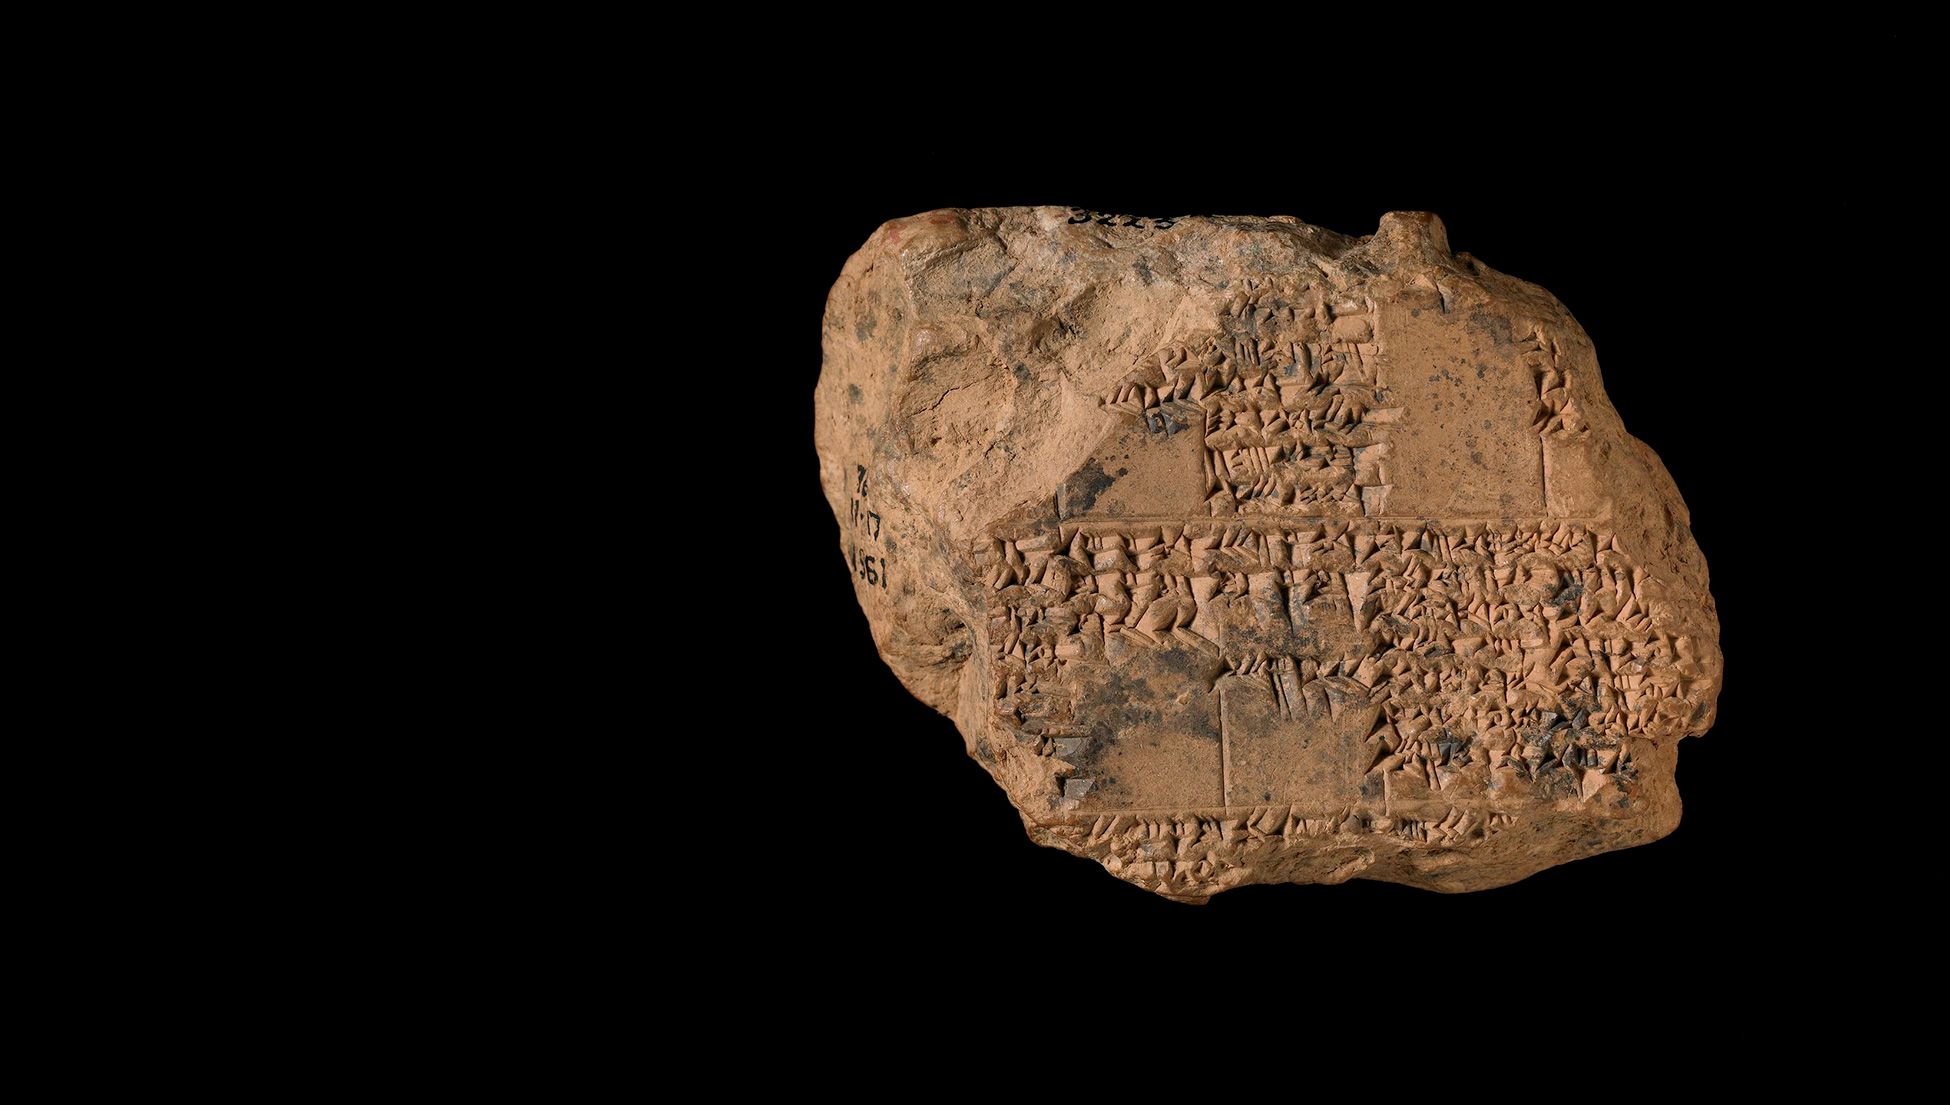 What did the ancient Babylonians discern in the skies above? | Psyche